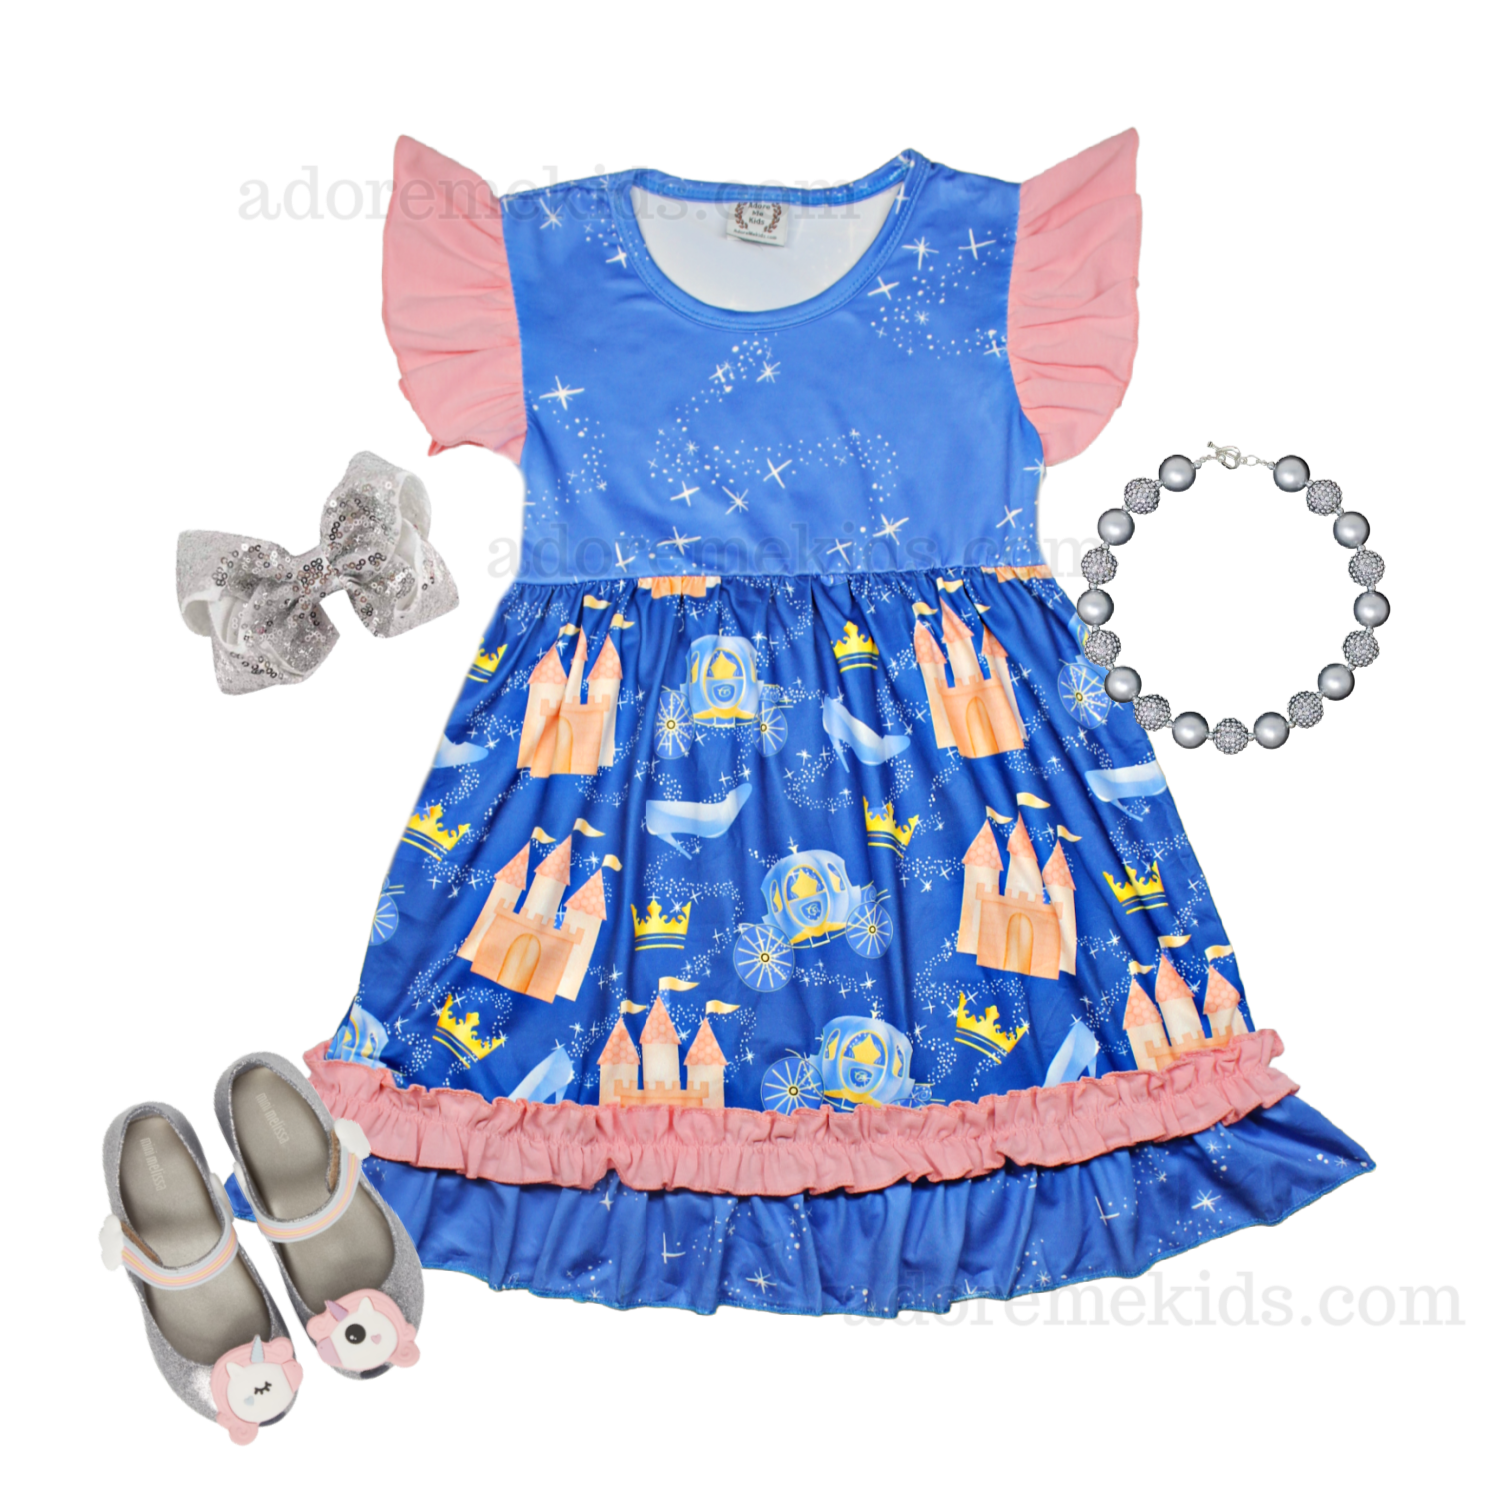 disney boutique outfits for toddlers